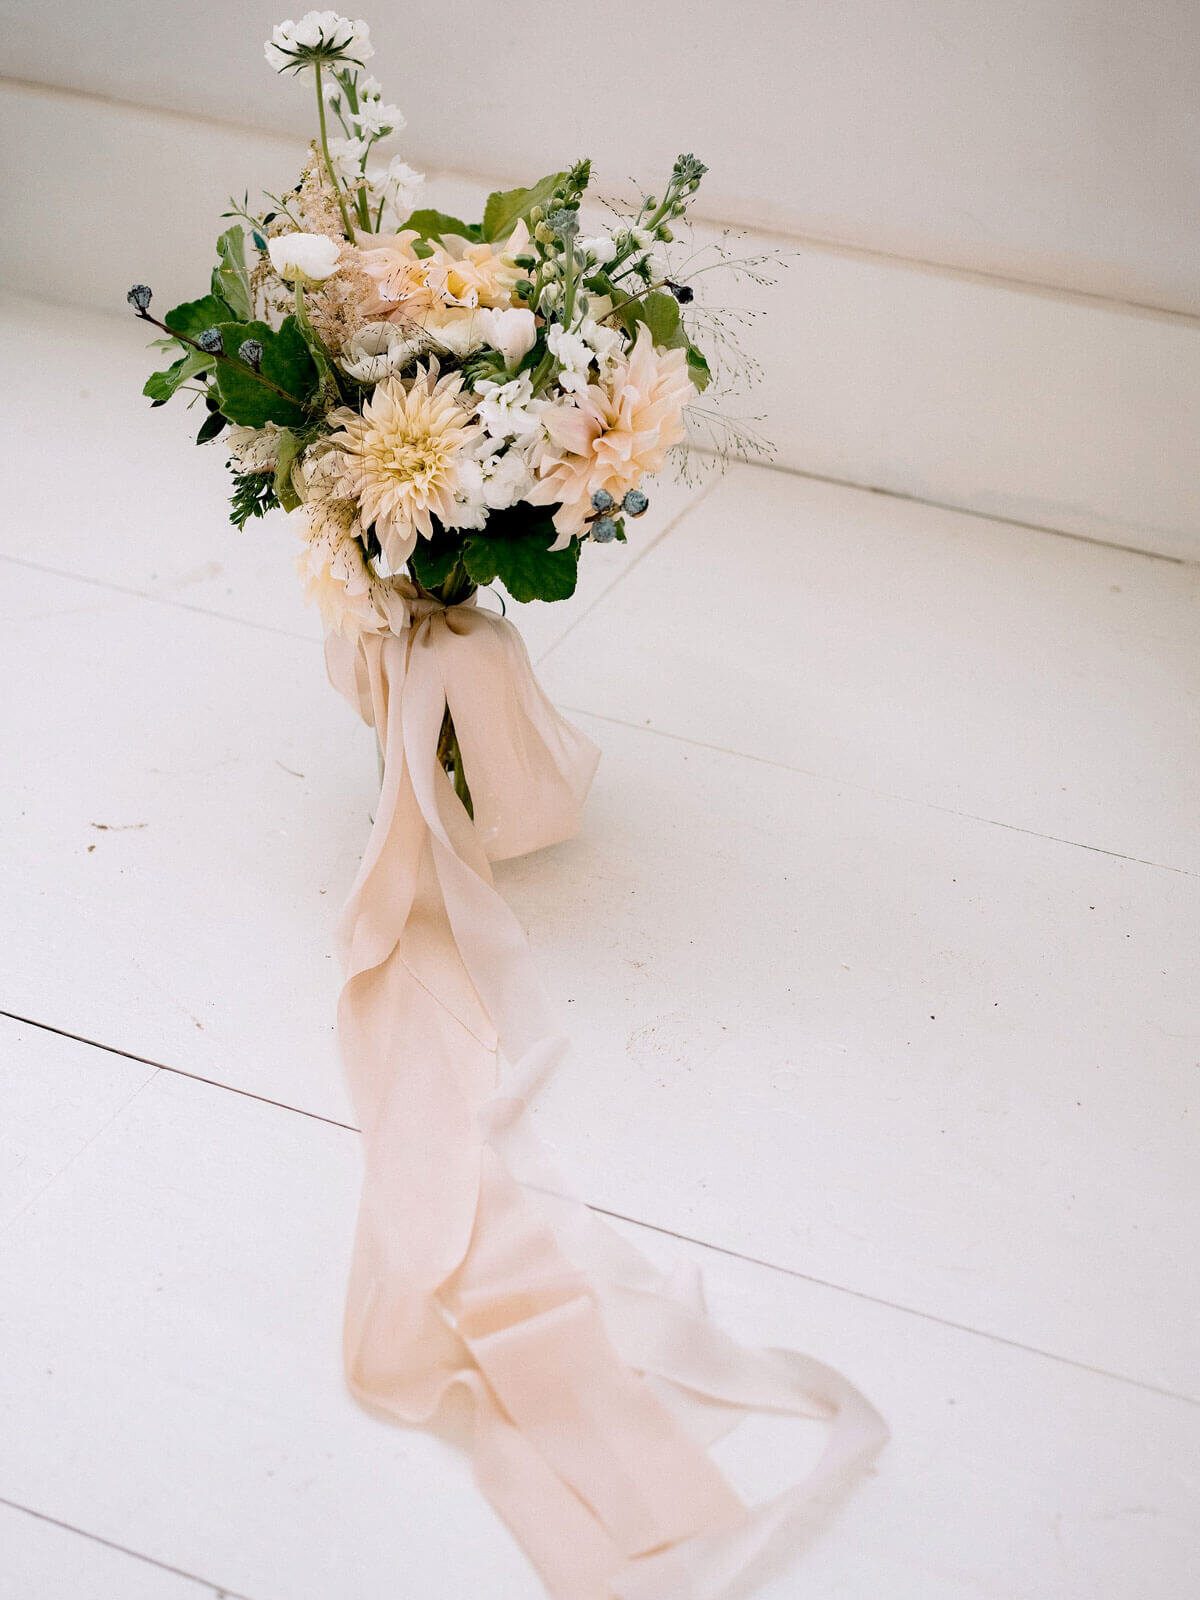 A flower bouquet tied with a cream-colored ribbon in Foxfire Mountain House, New York. Wedding Image by Jenny Fu Studio